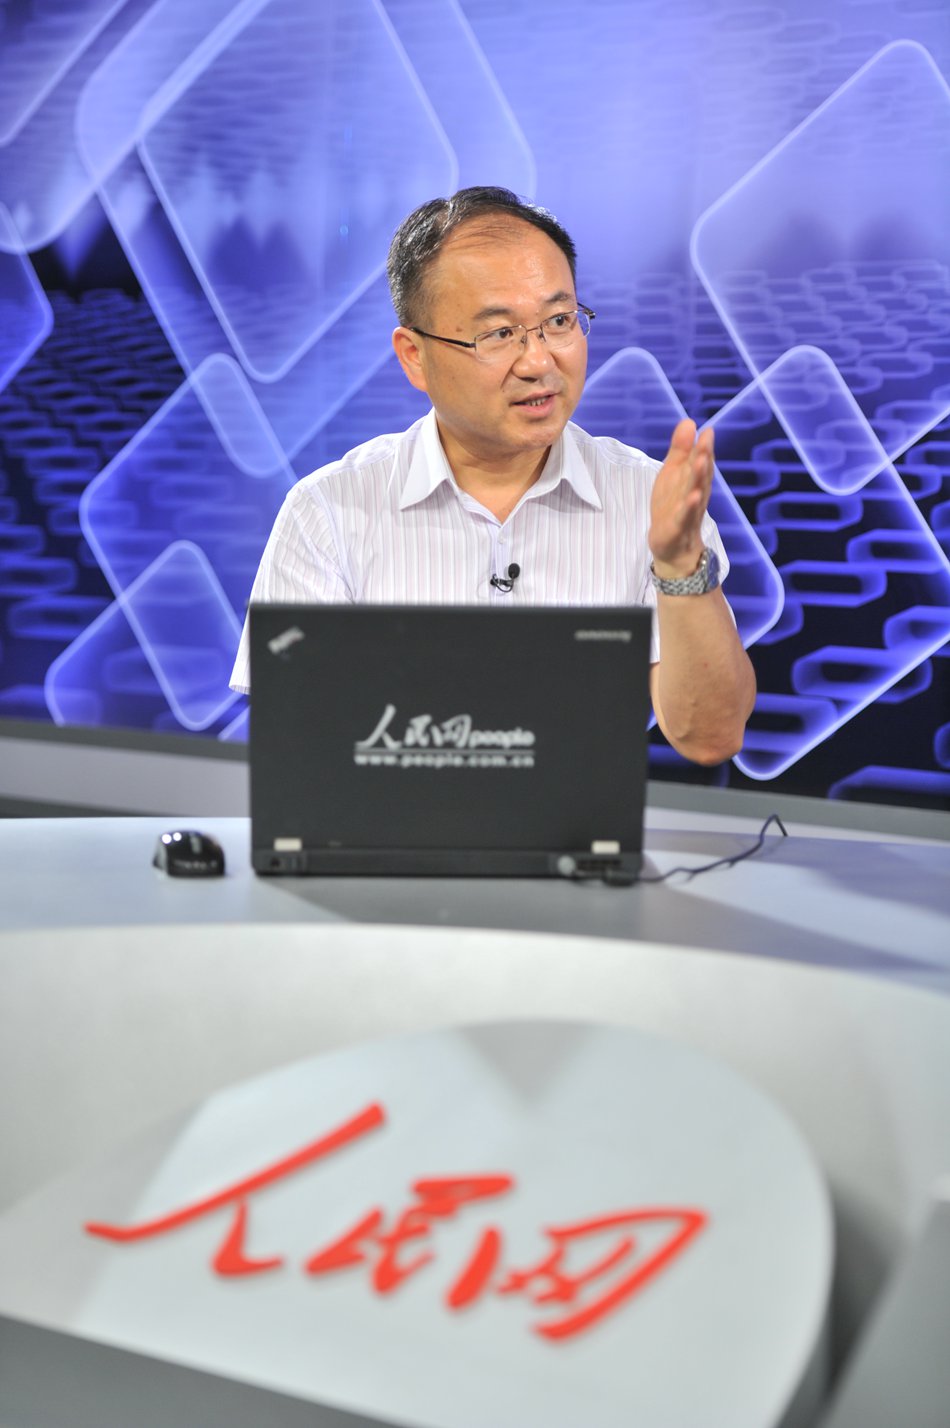 The Vice President of Communication University of China Hu Zhengrong receives a video interview with People's Daily Online.(People's Daily Online/Yu Kai)